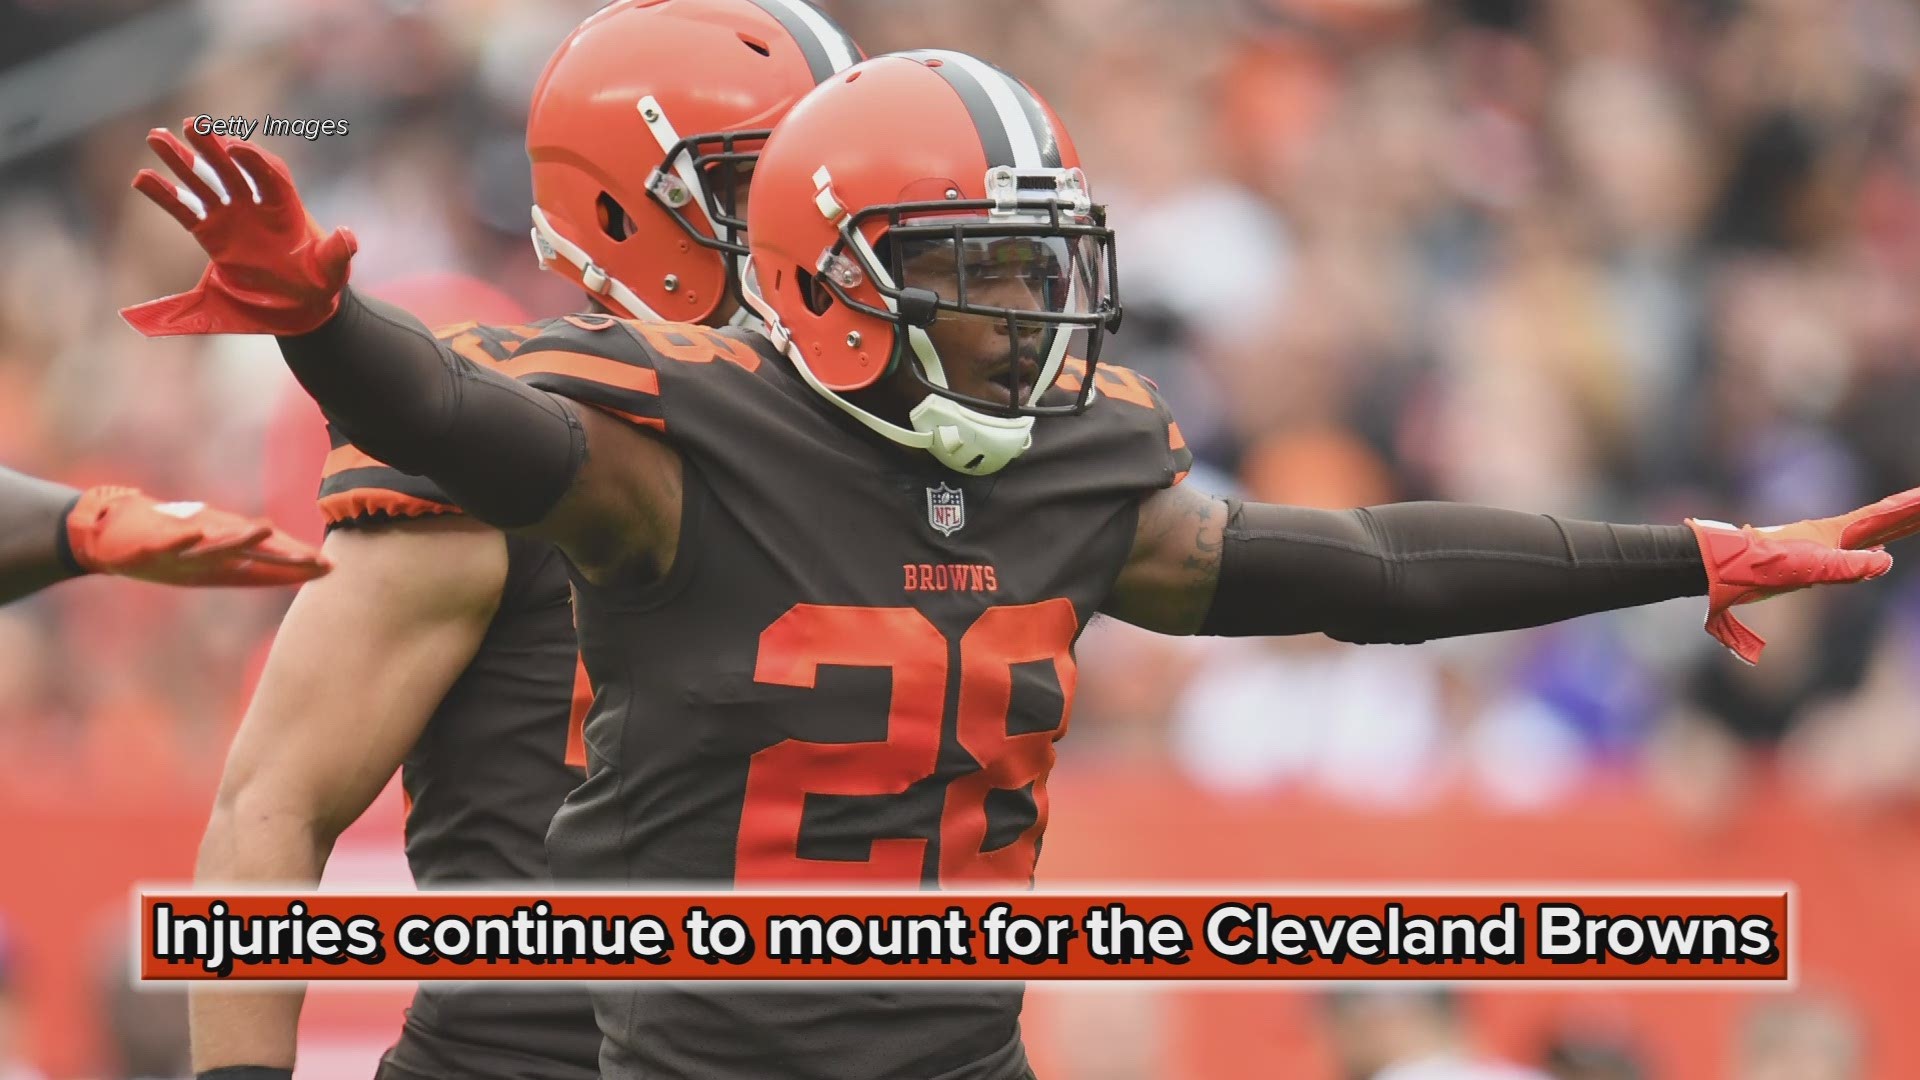 Cleveland Browns' secondary takes another hit as E.J. Gaines enters NFL Concussion Protocol